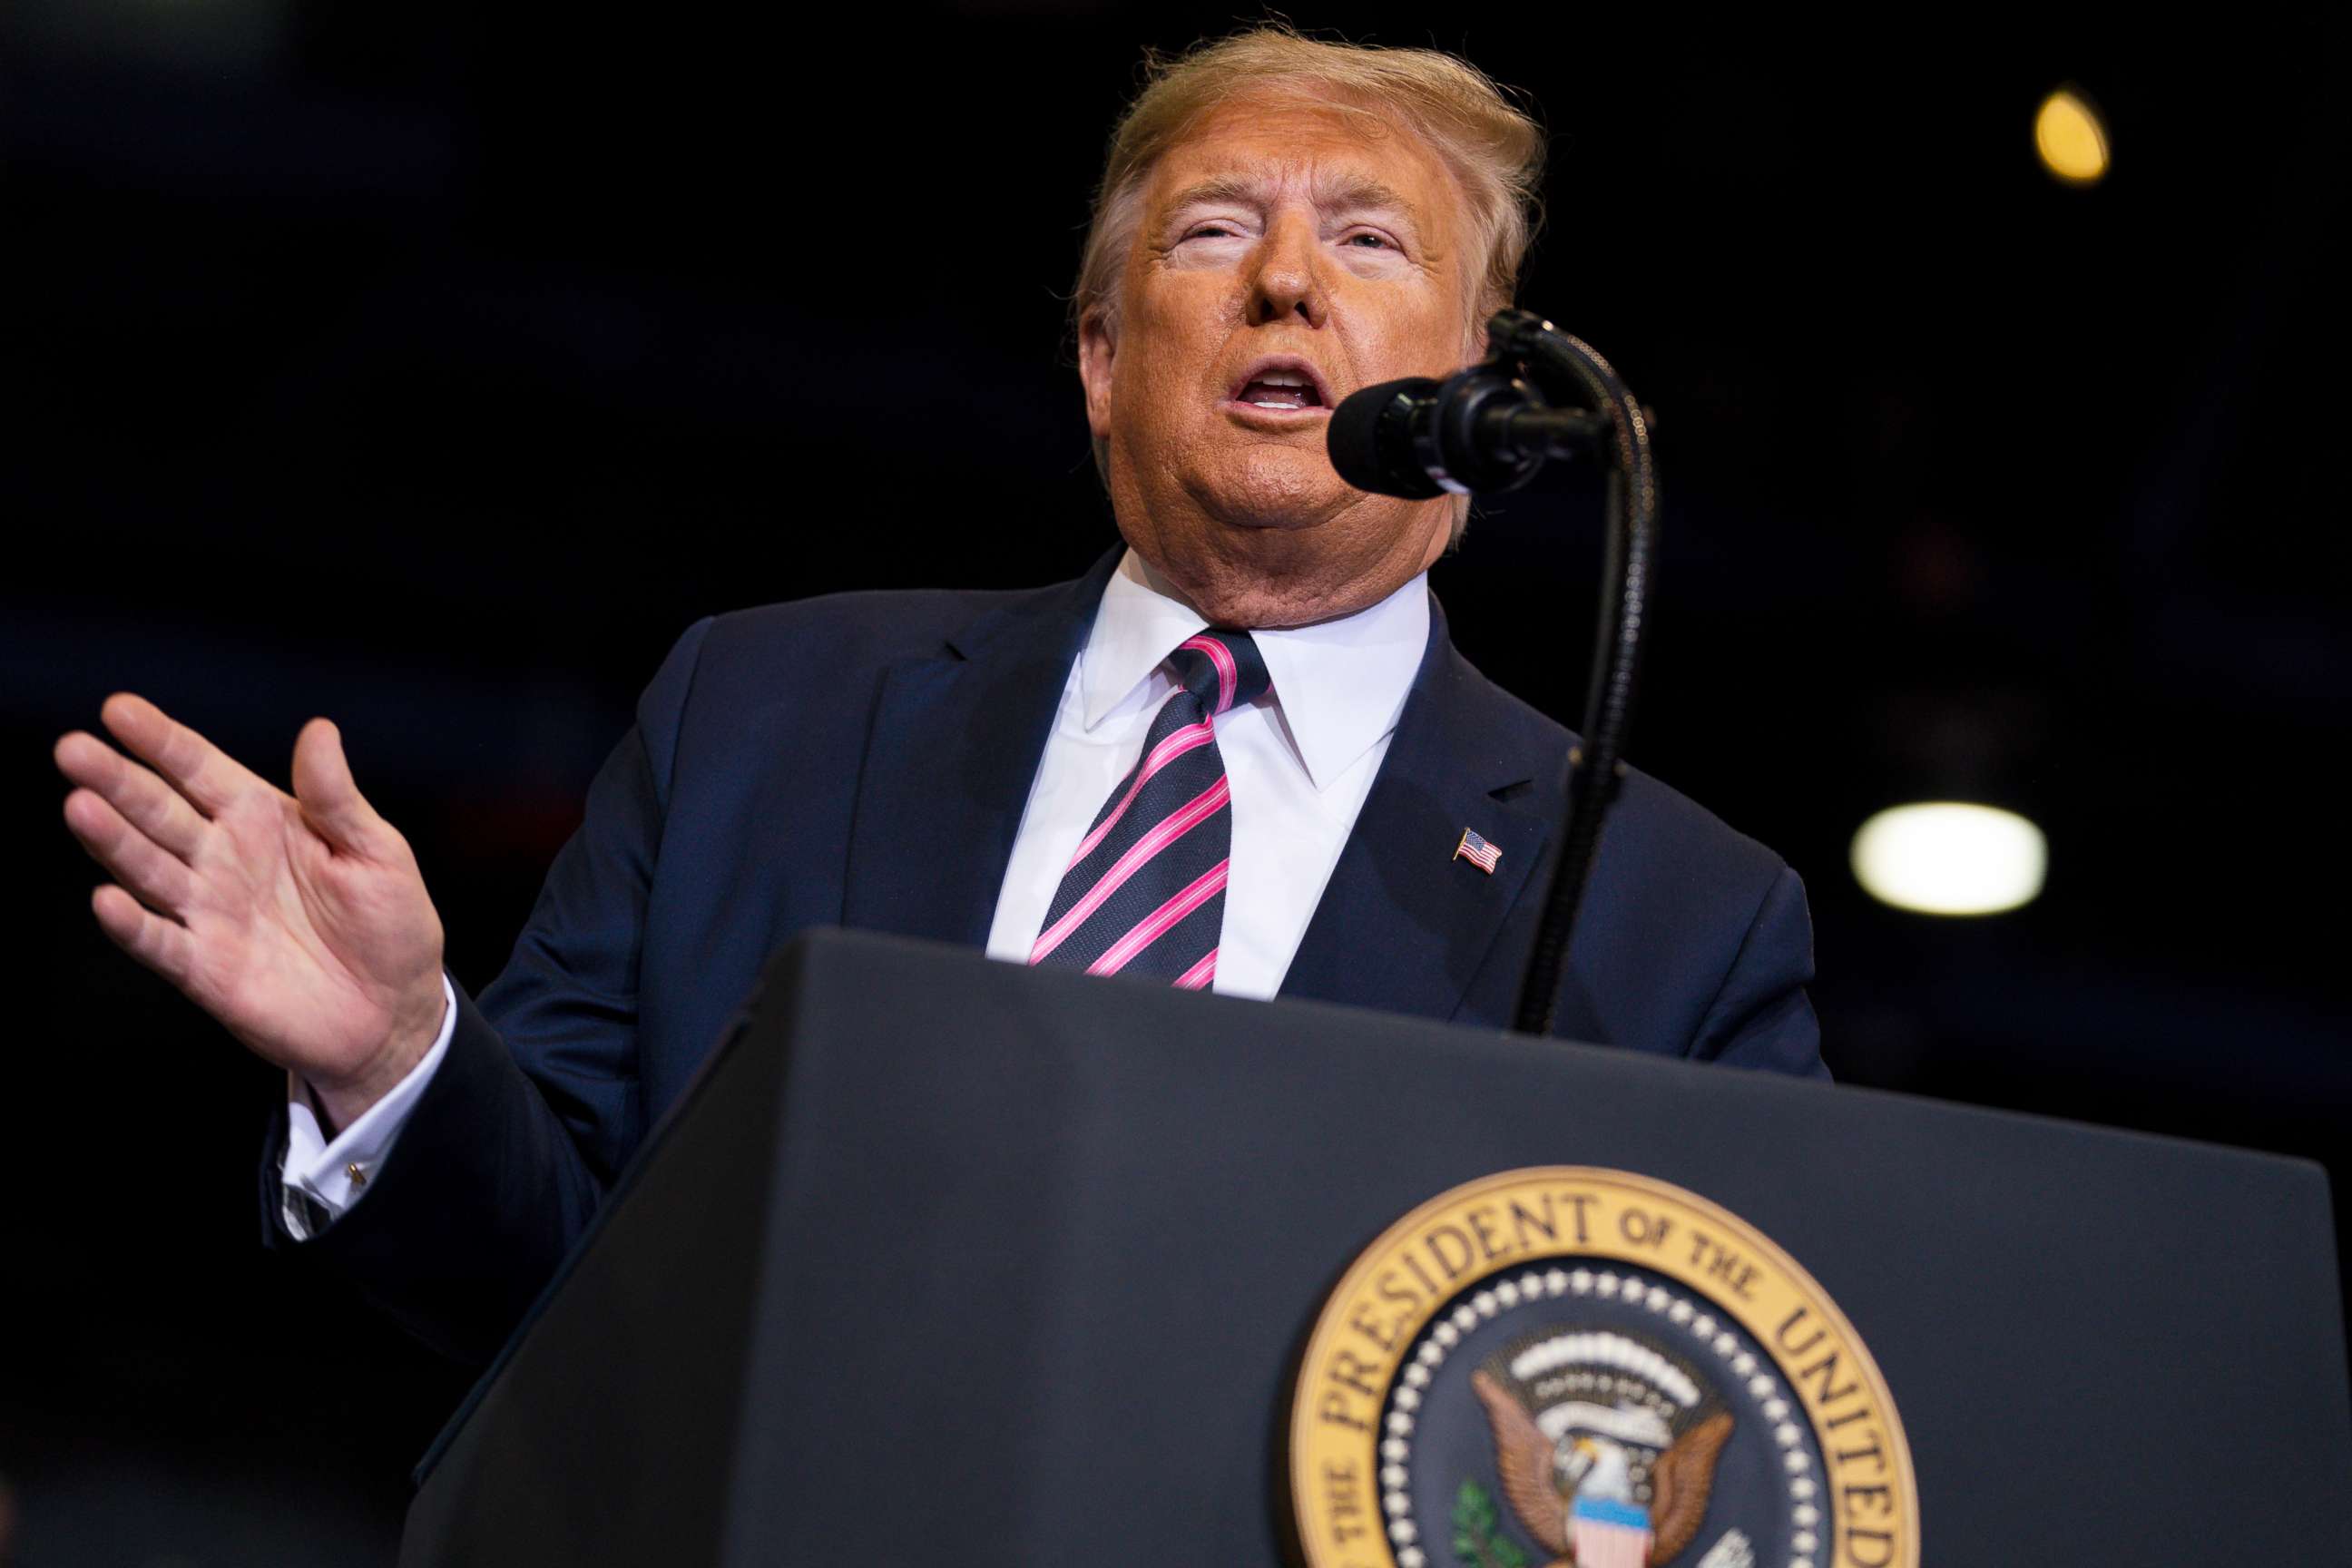 PHOTO: President Donald Trump speaks during a campaign rally at the Las Vegas Convention Center, Feb. 21, 2020, in Las Vegas.